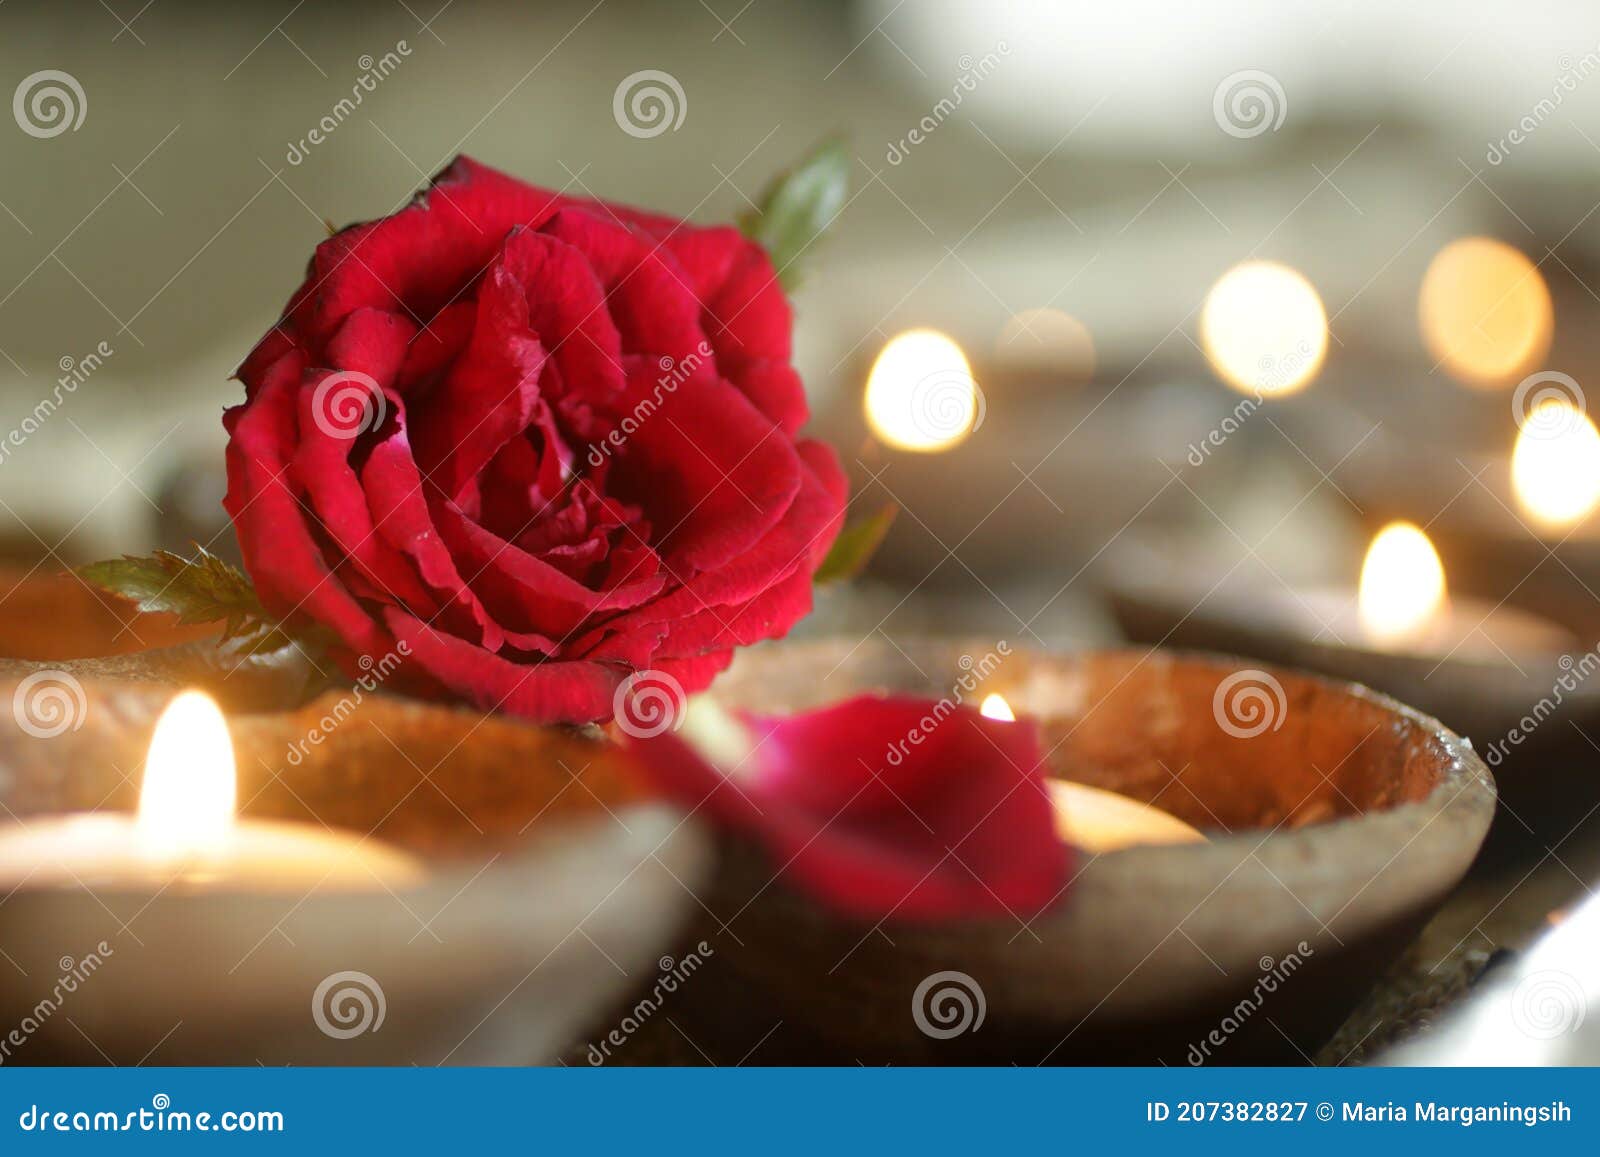 candles light and red rose petals. background of single red rose and candle lights. fragility and hope concept